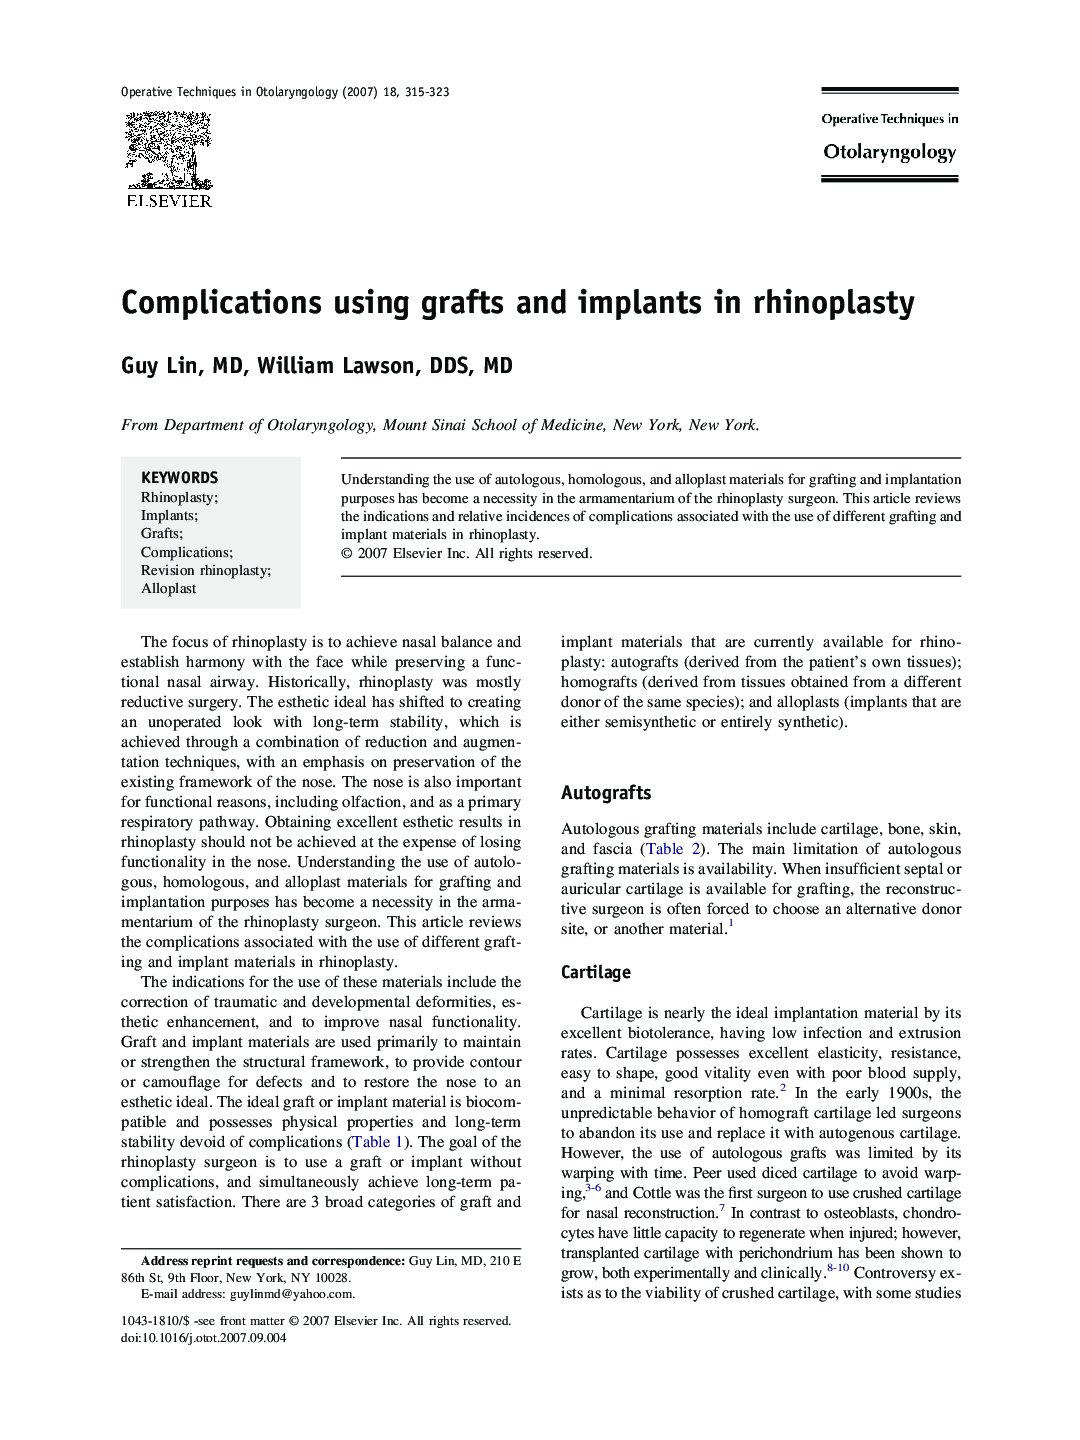 Complications using grafts and implants in rhinoplasty